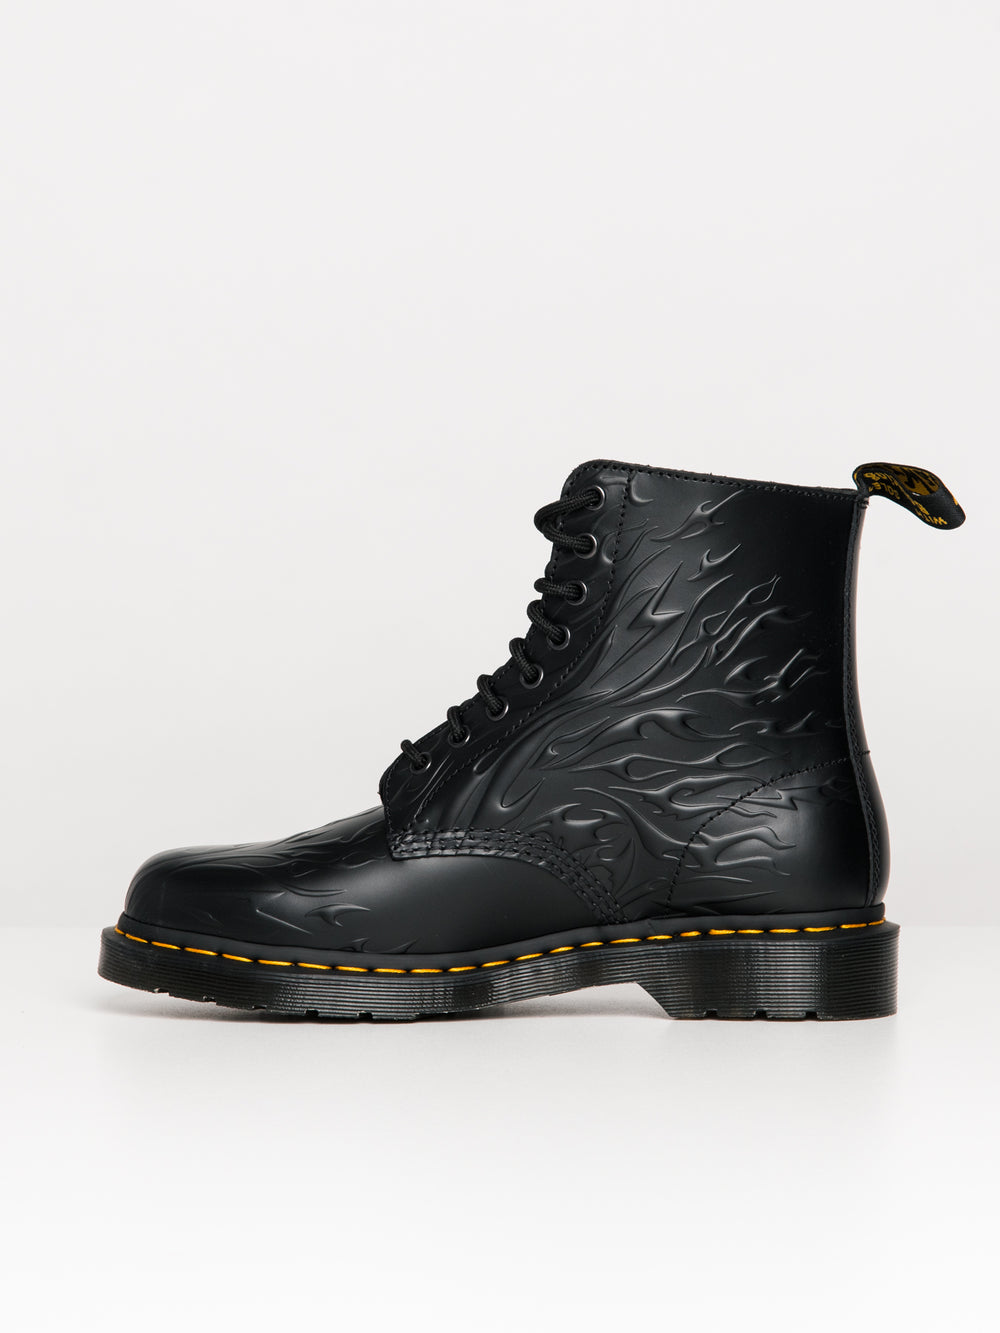 DR MARTENS 1460 FLAMES SMOOTH BLACK BOOT - CLEARANCE